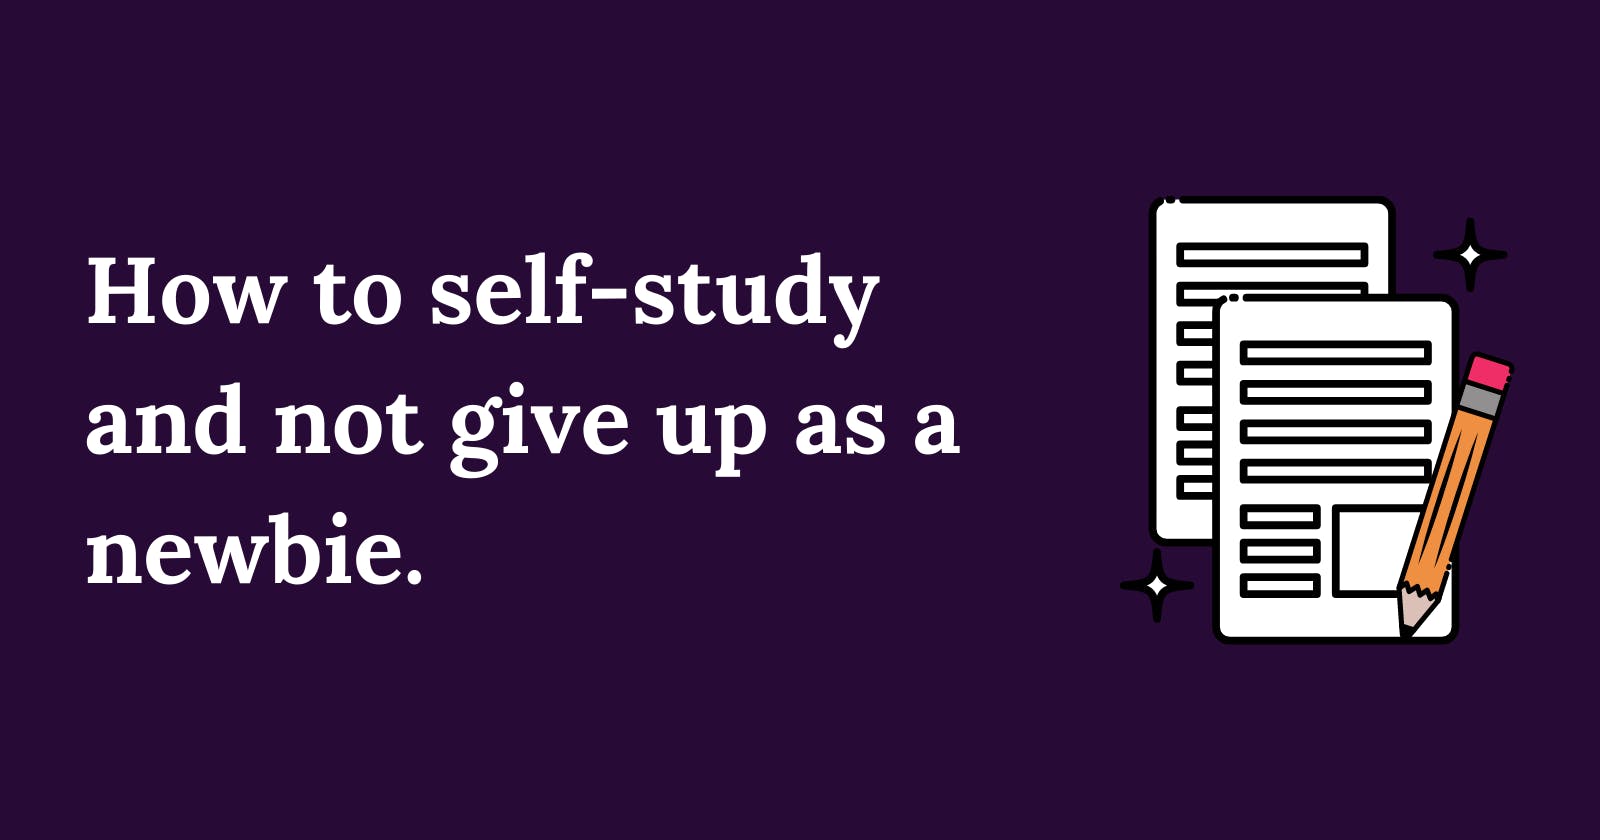 How to self-study and not give up as a newbie.